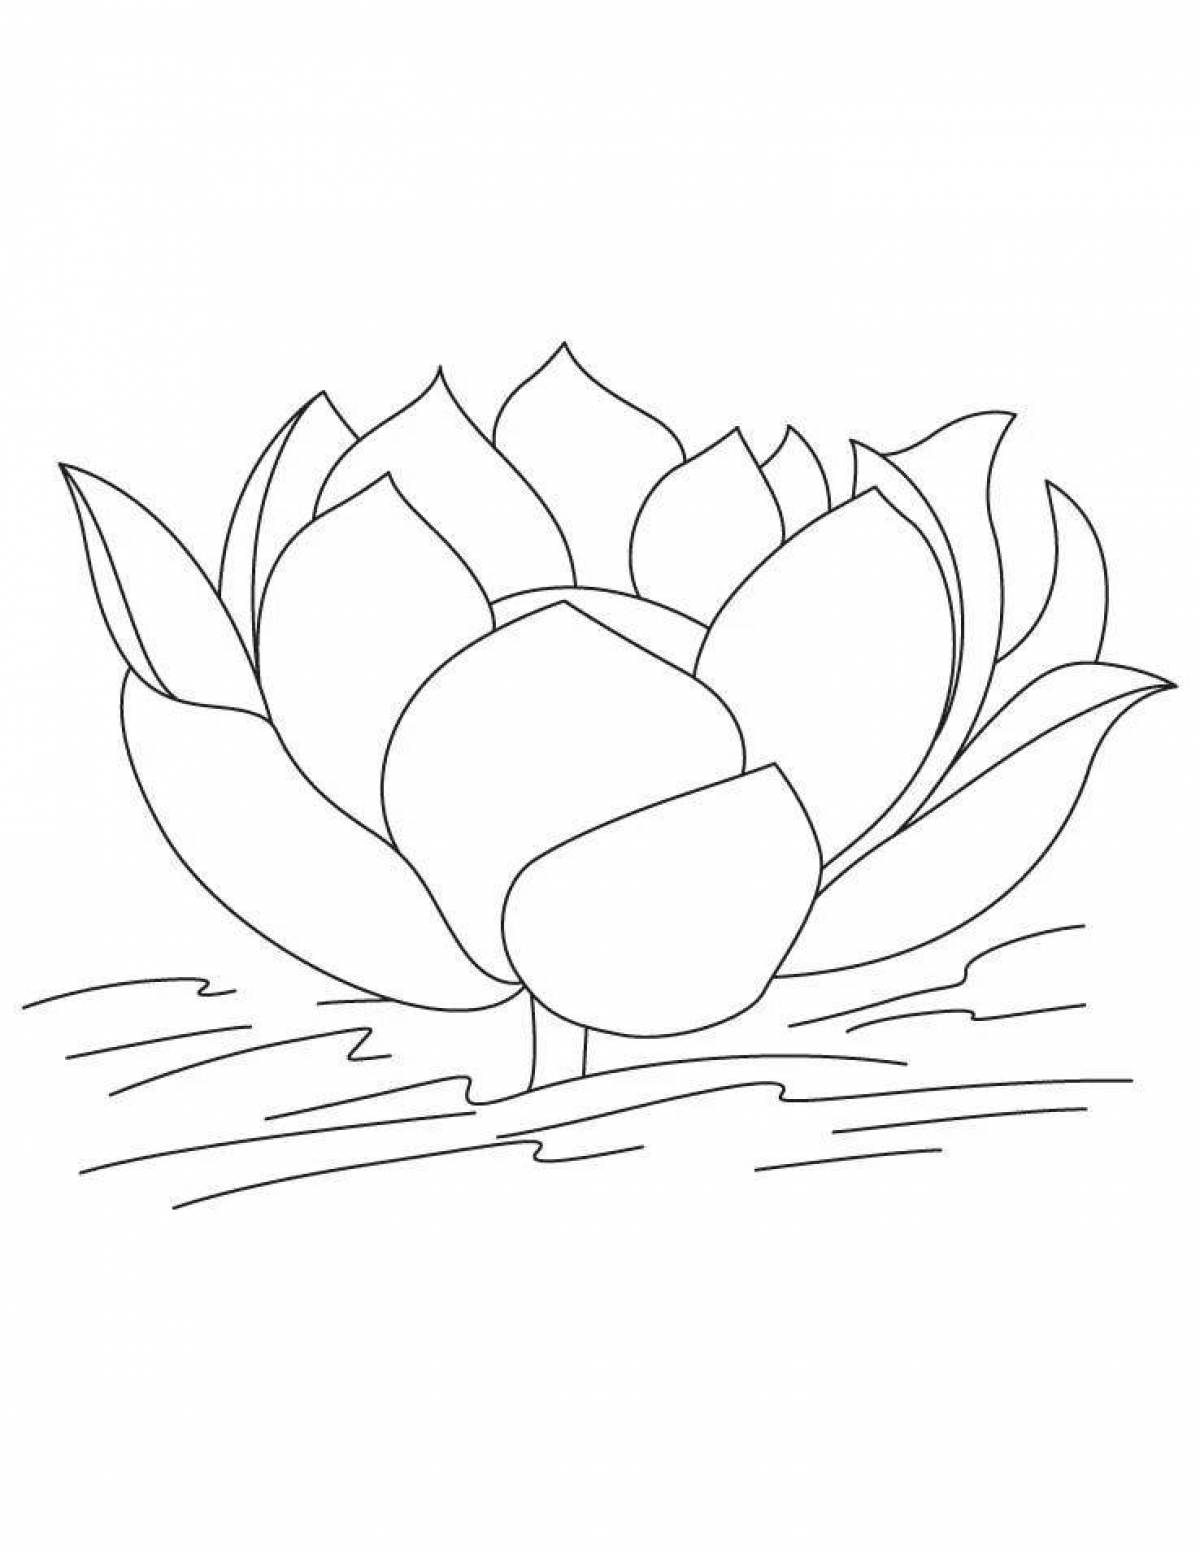 Charming white water lily coloring book